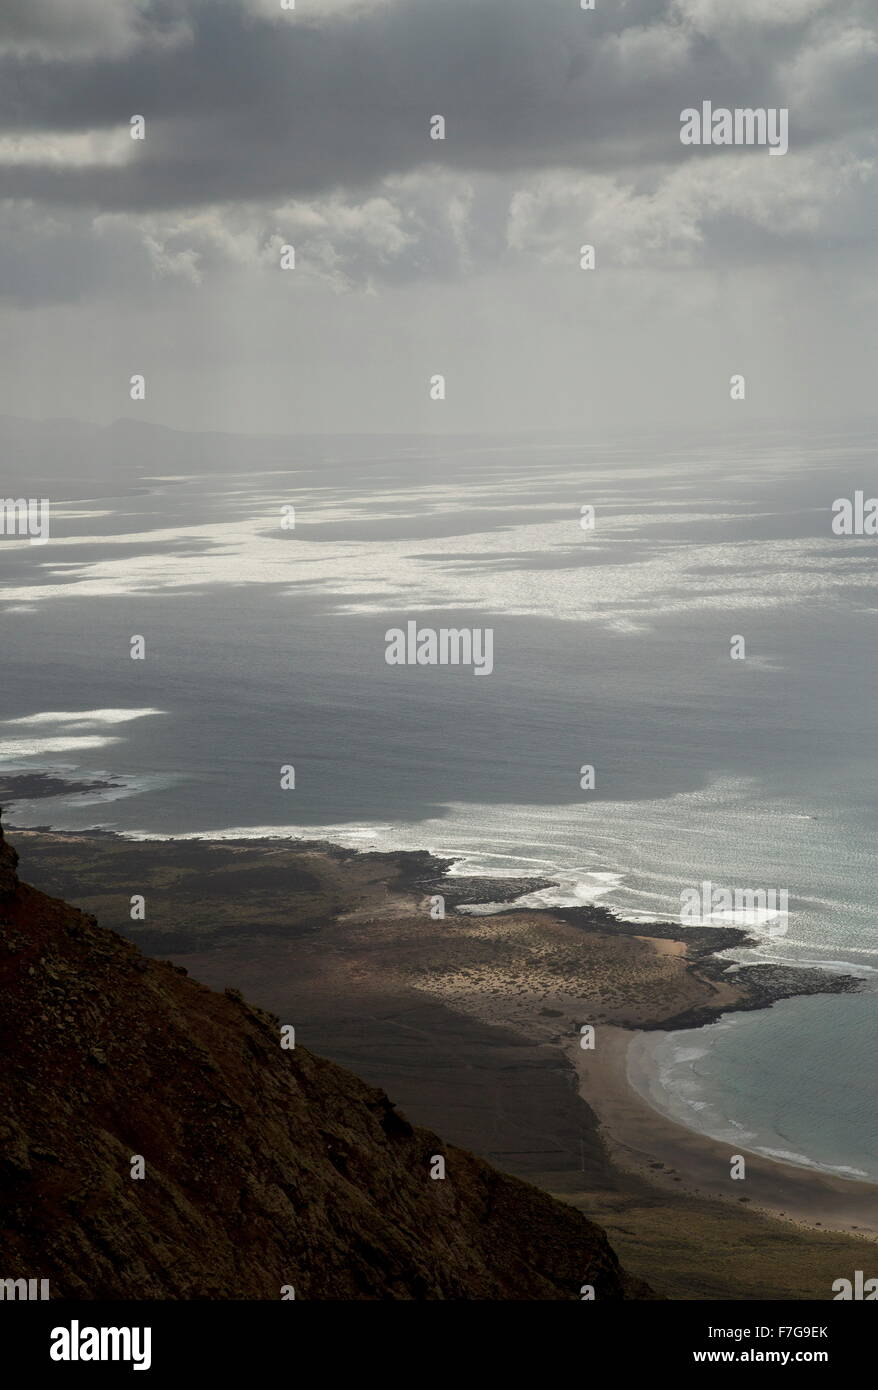 Light and shade on the ocean in the view from El Risco cliffs, Lanzarote. Stock Photo